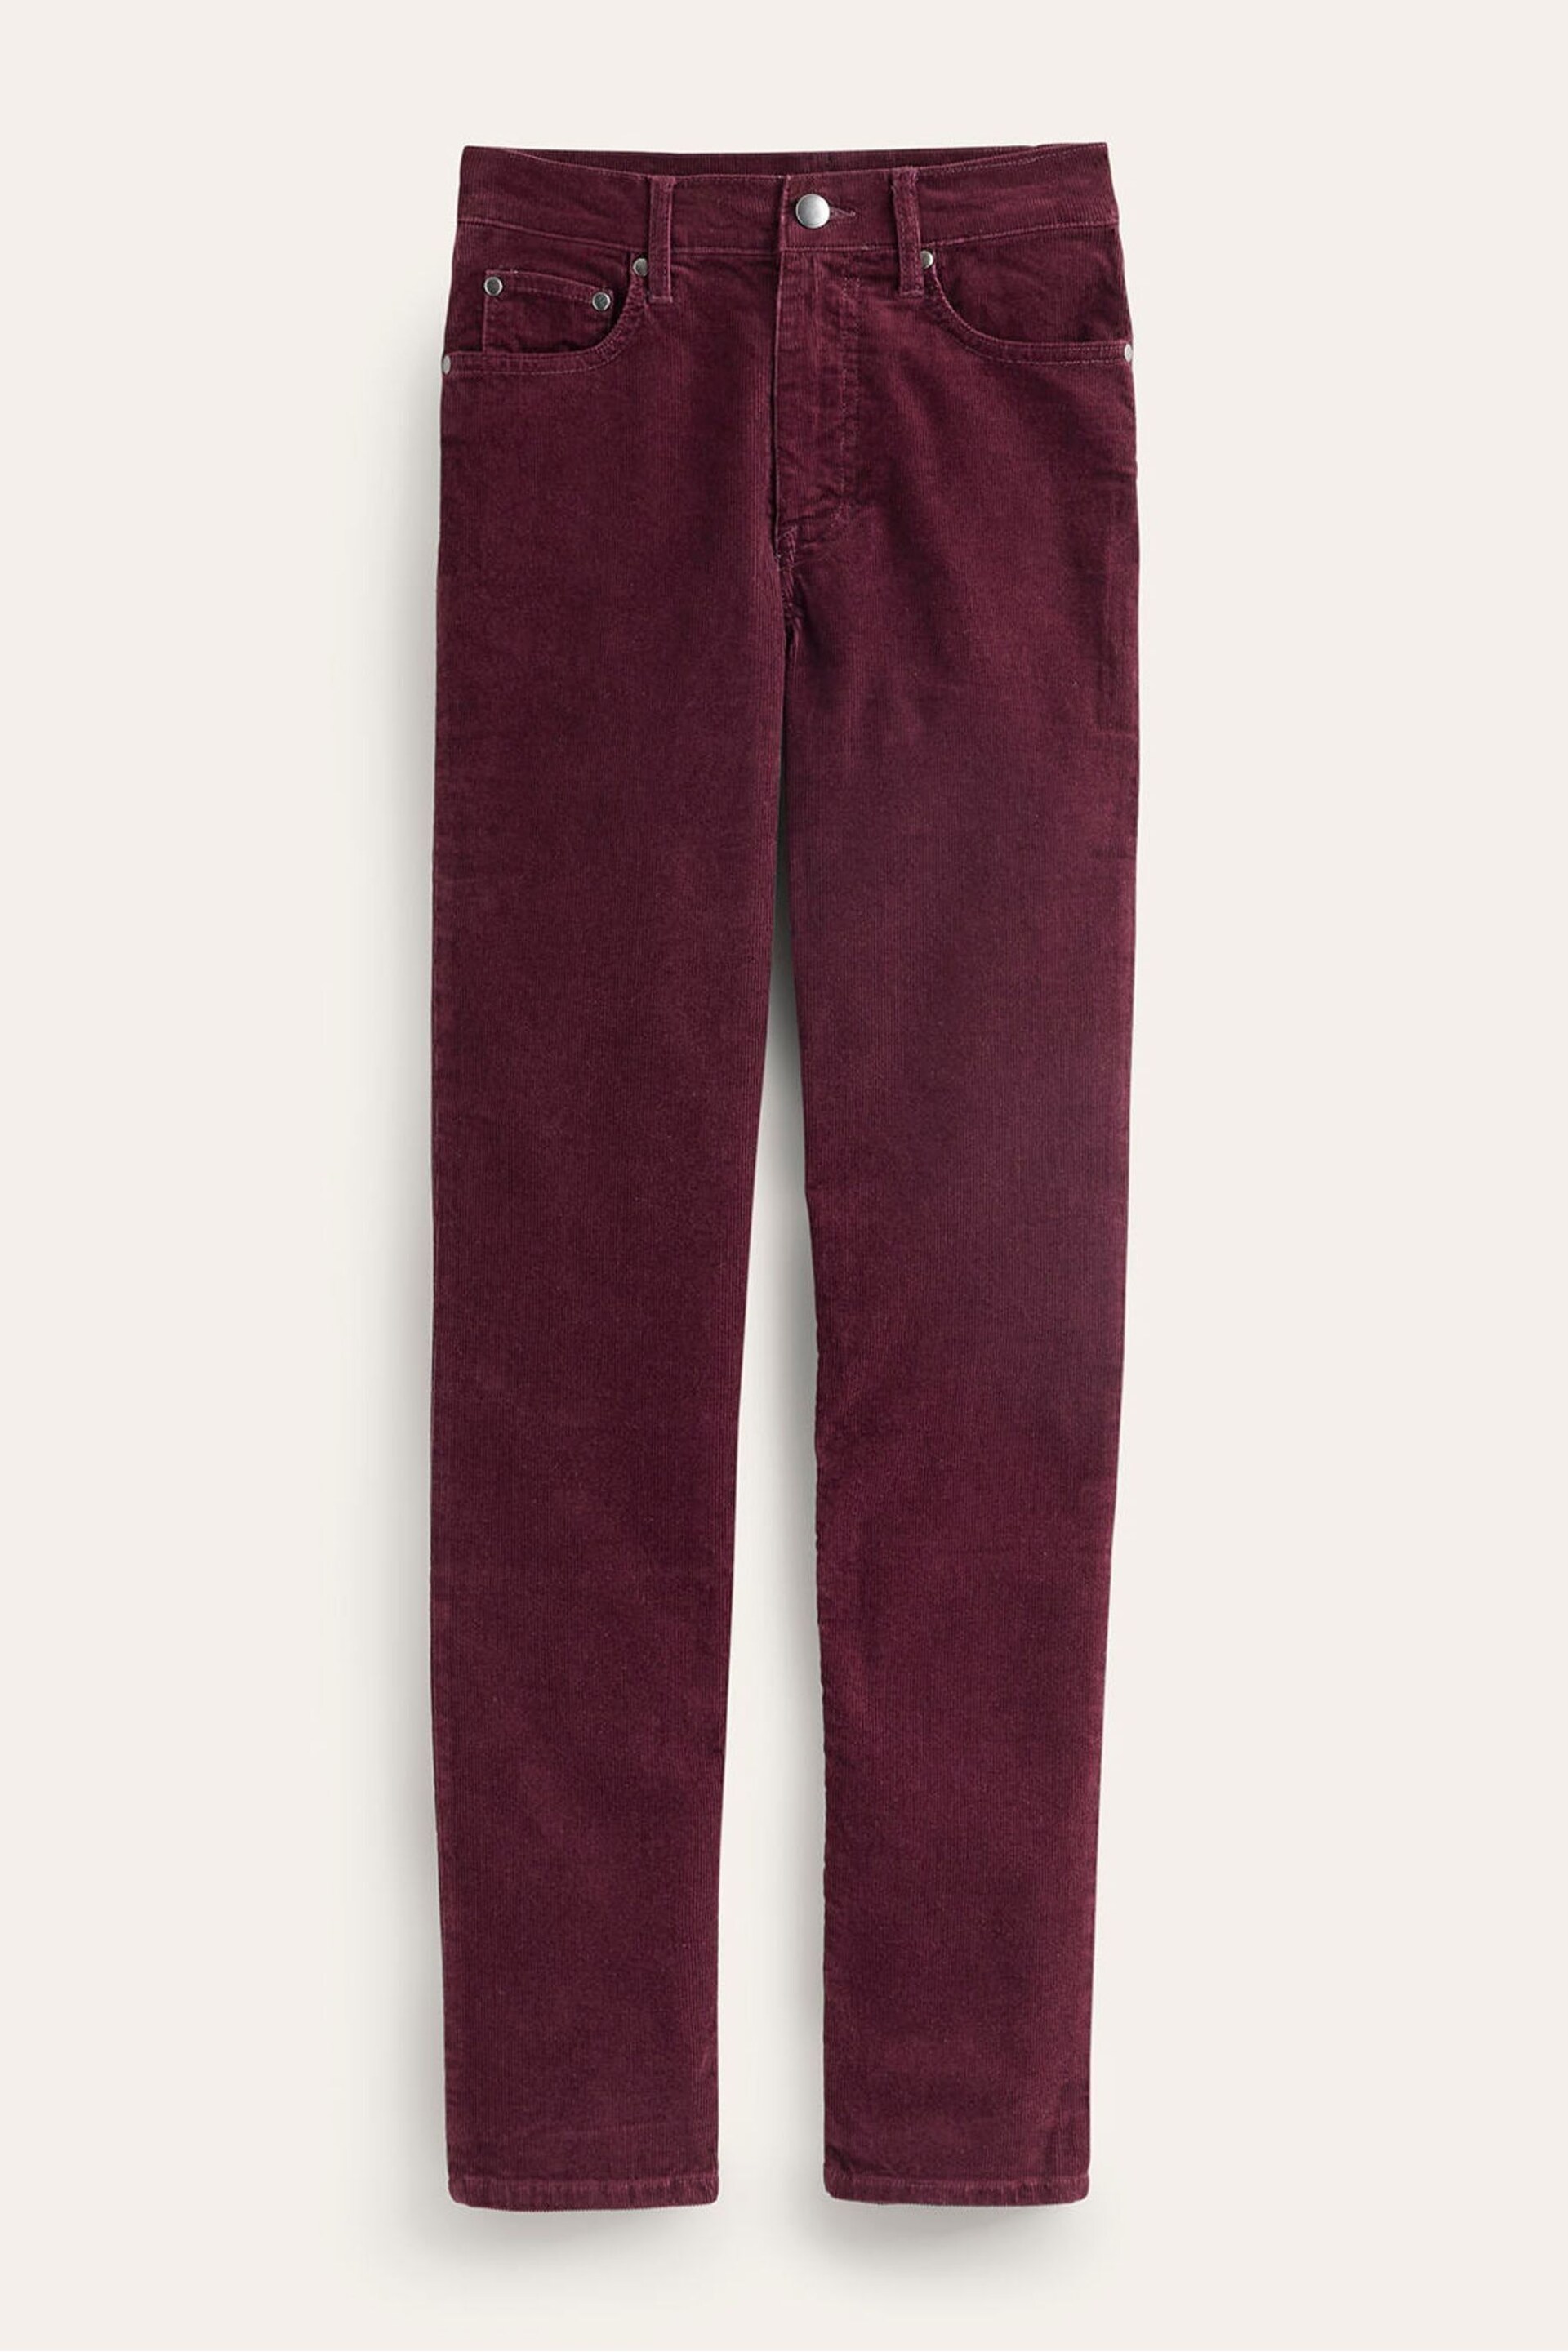 Boden Red Slim Corduroy Straight Jeans - Image 7 of 7